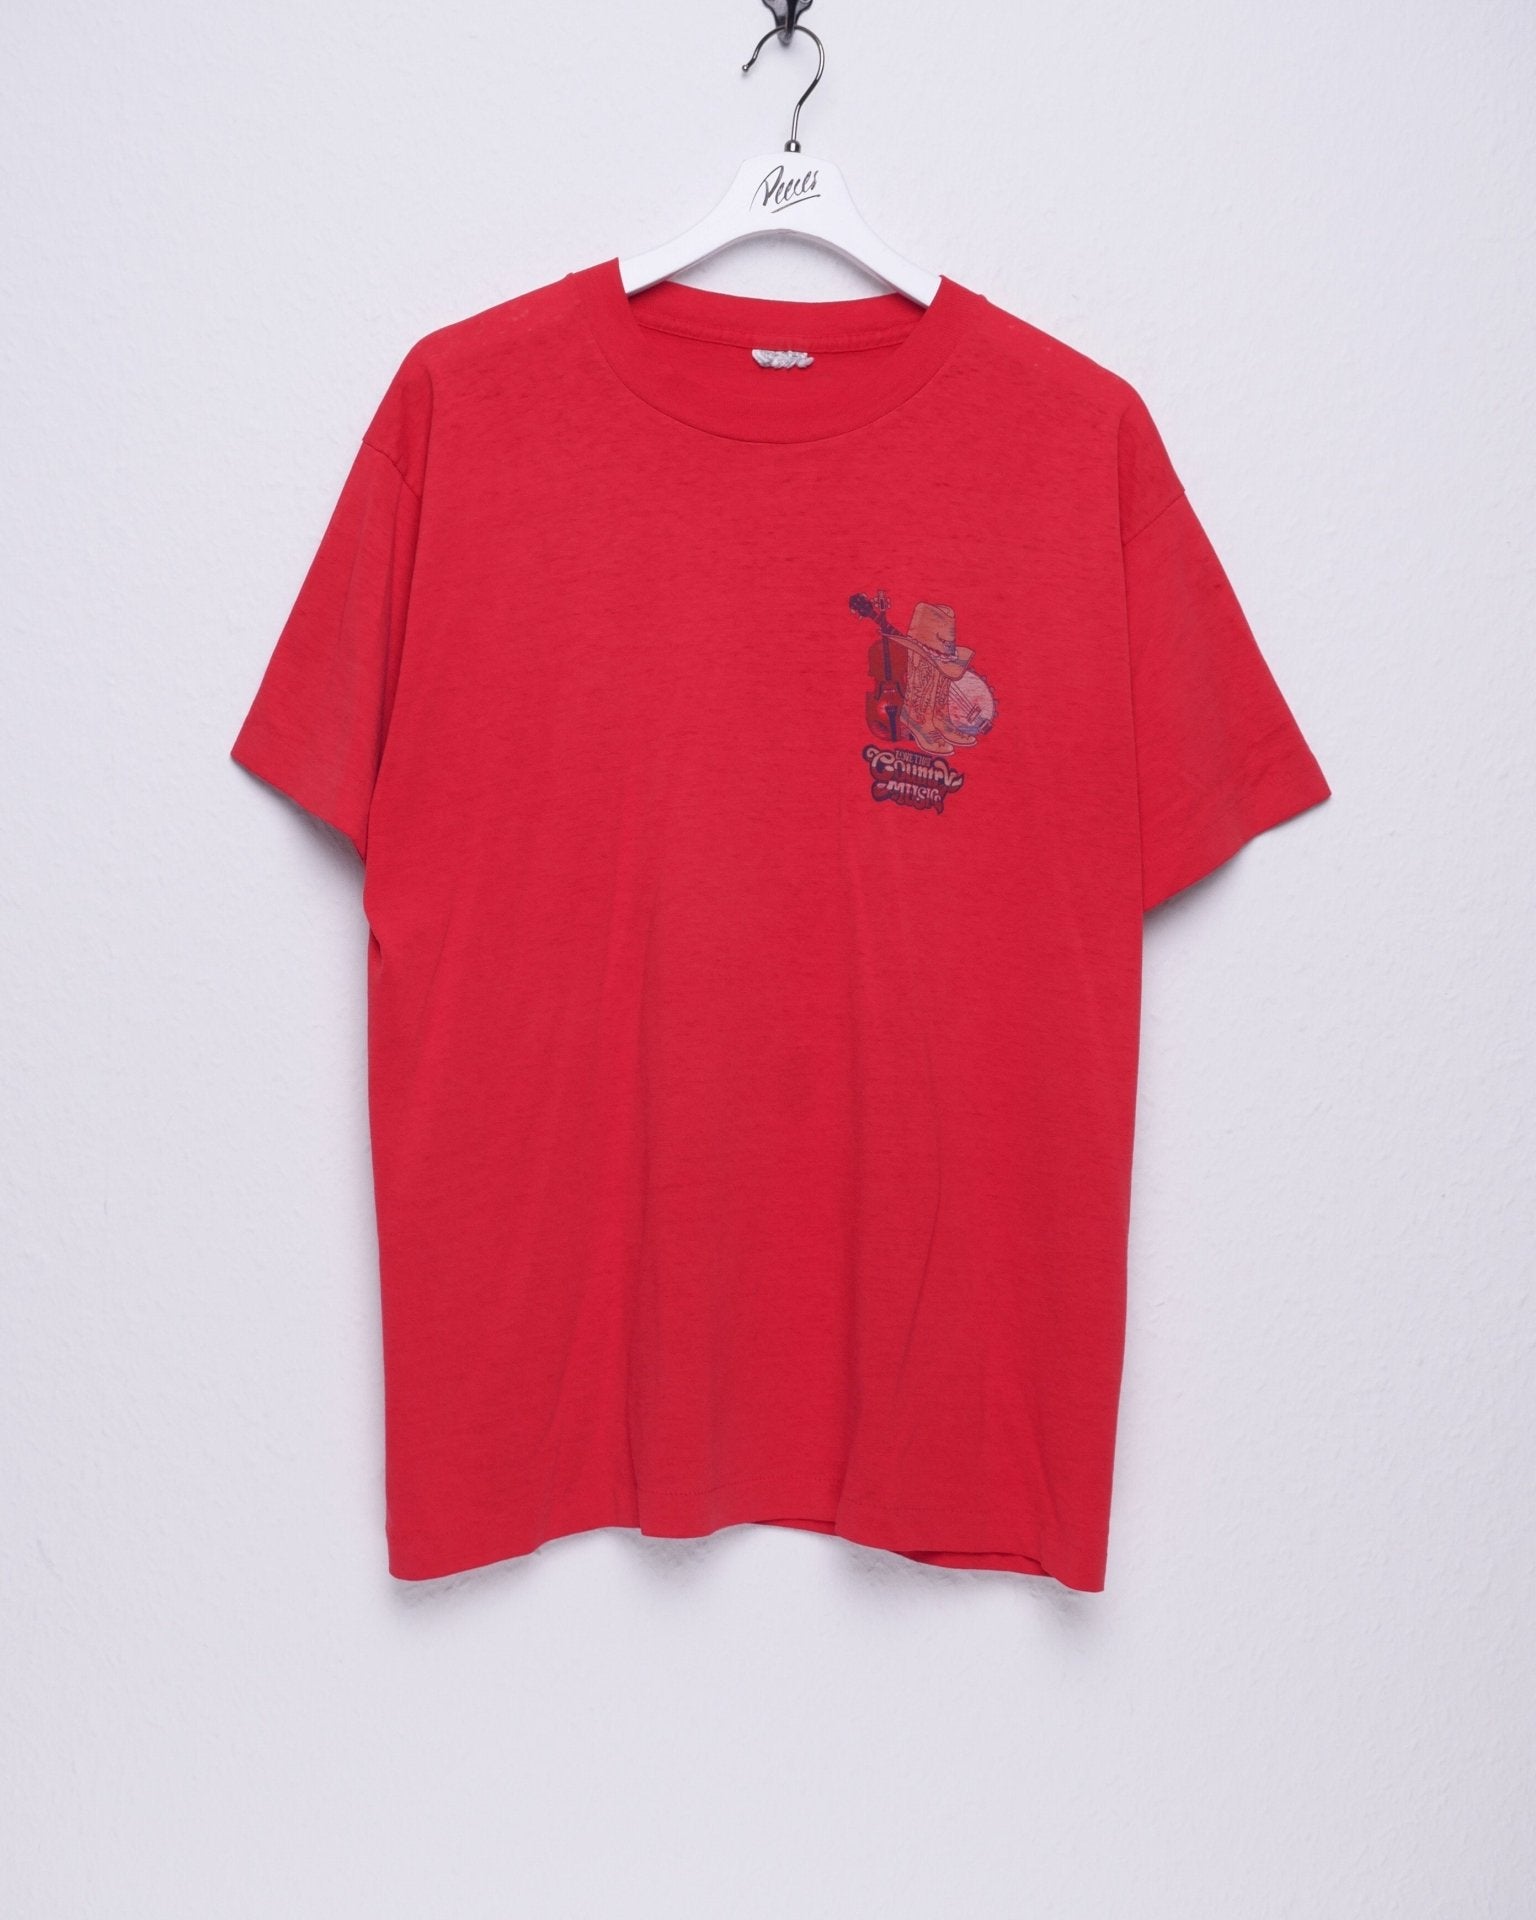 'Love that Country Music' printed Logo red Shirt - Peeces